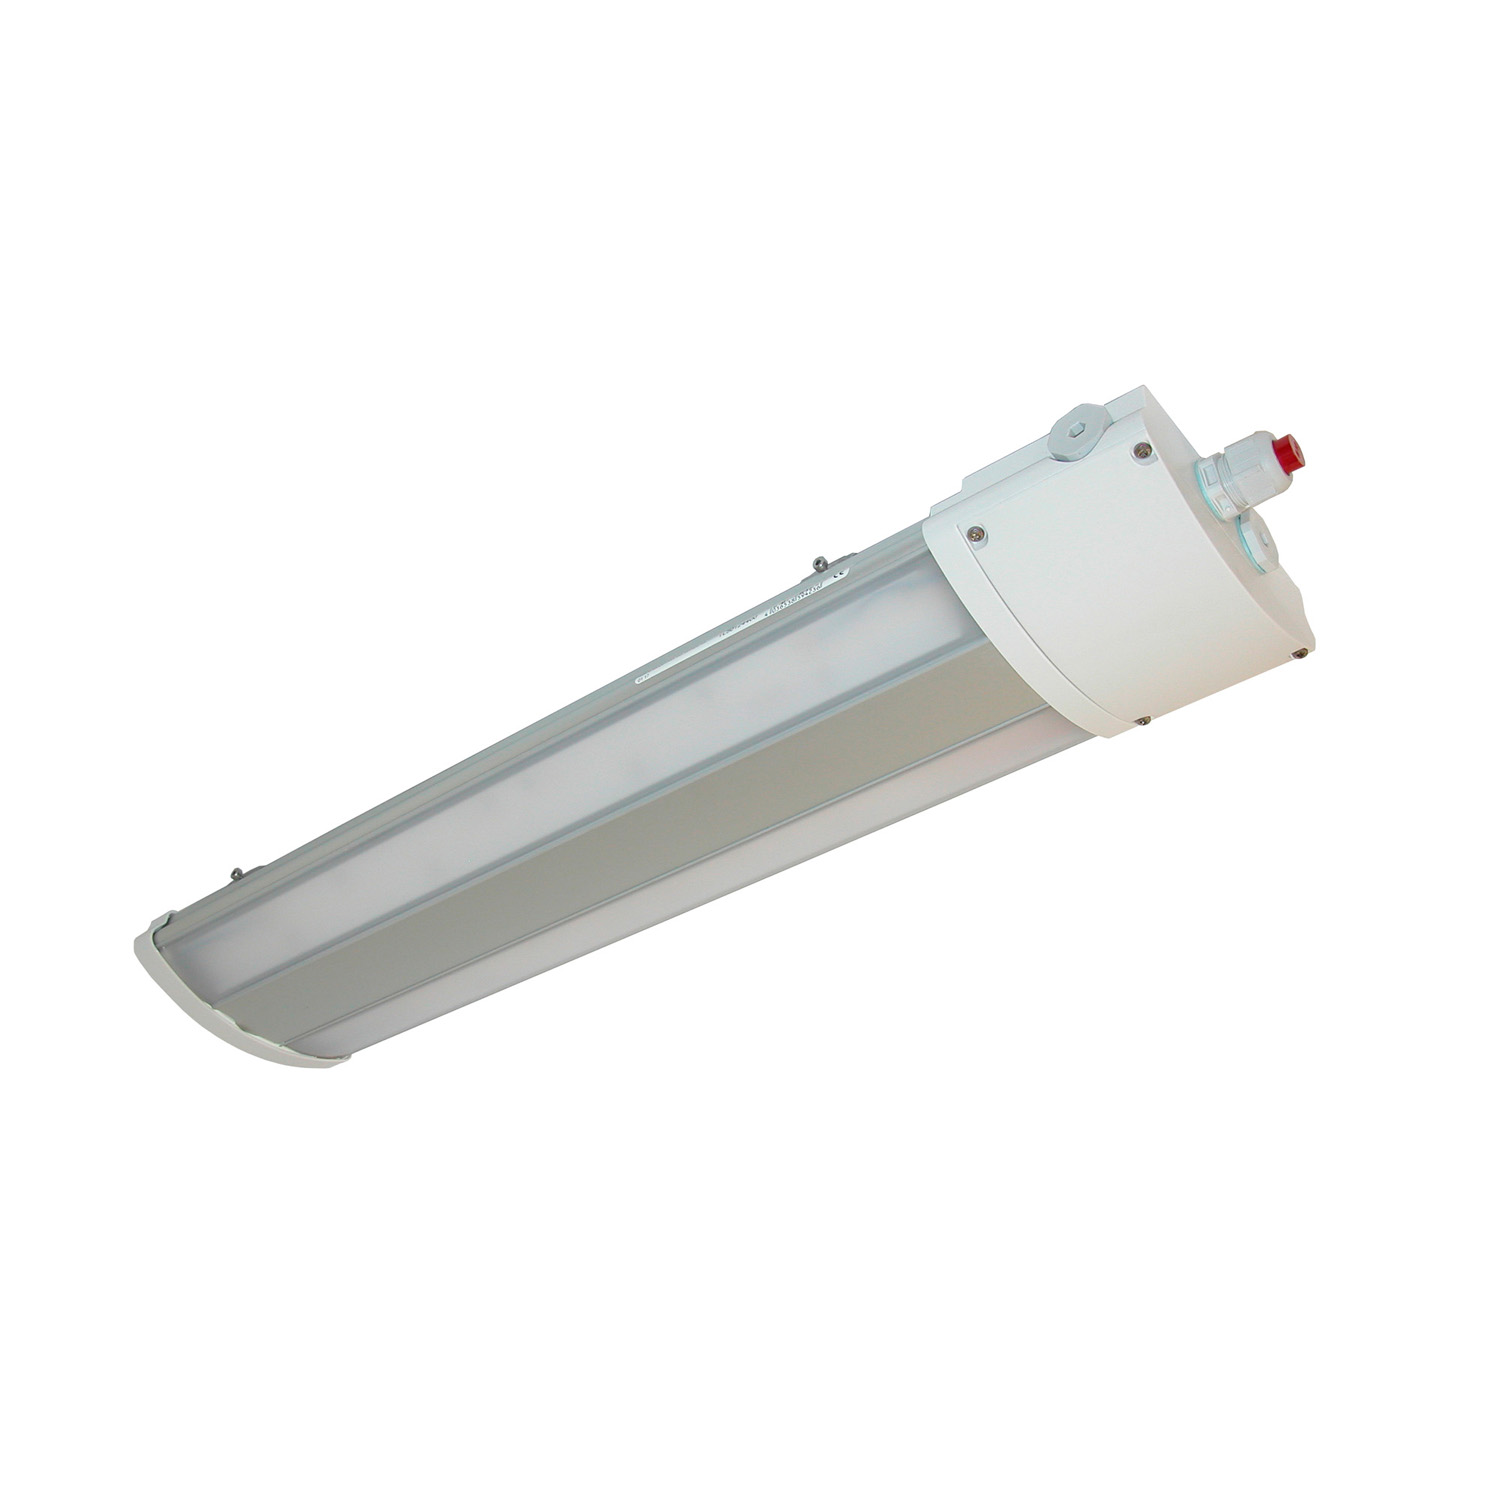 TL50126400 Watertight LED luminaire multipurpose, TL50 2200 840 24 1XM25 AS, CABLE ENTRY:1XM25X1.5 POLYAMIDE D9-27MM